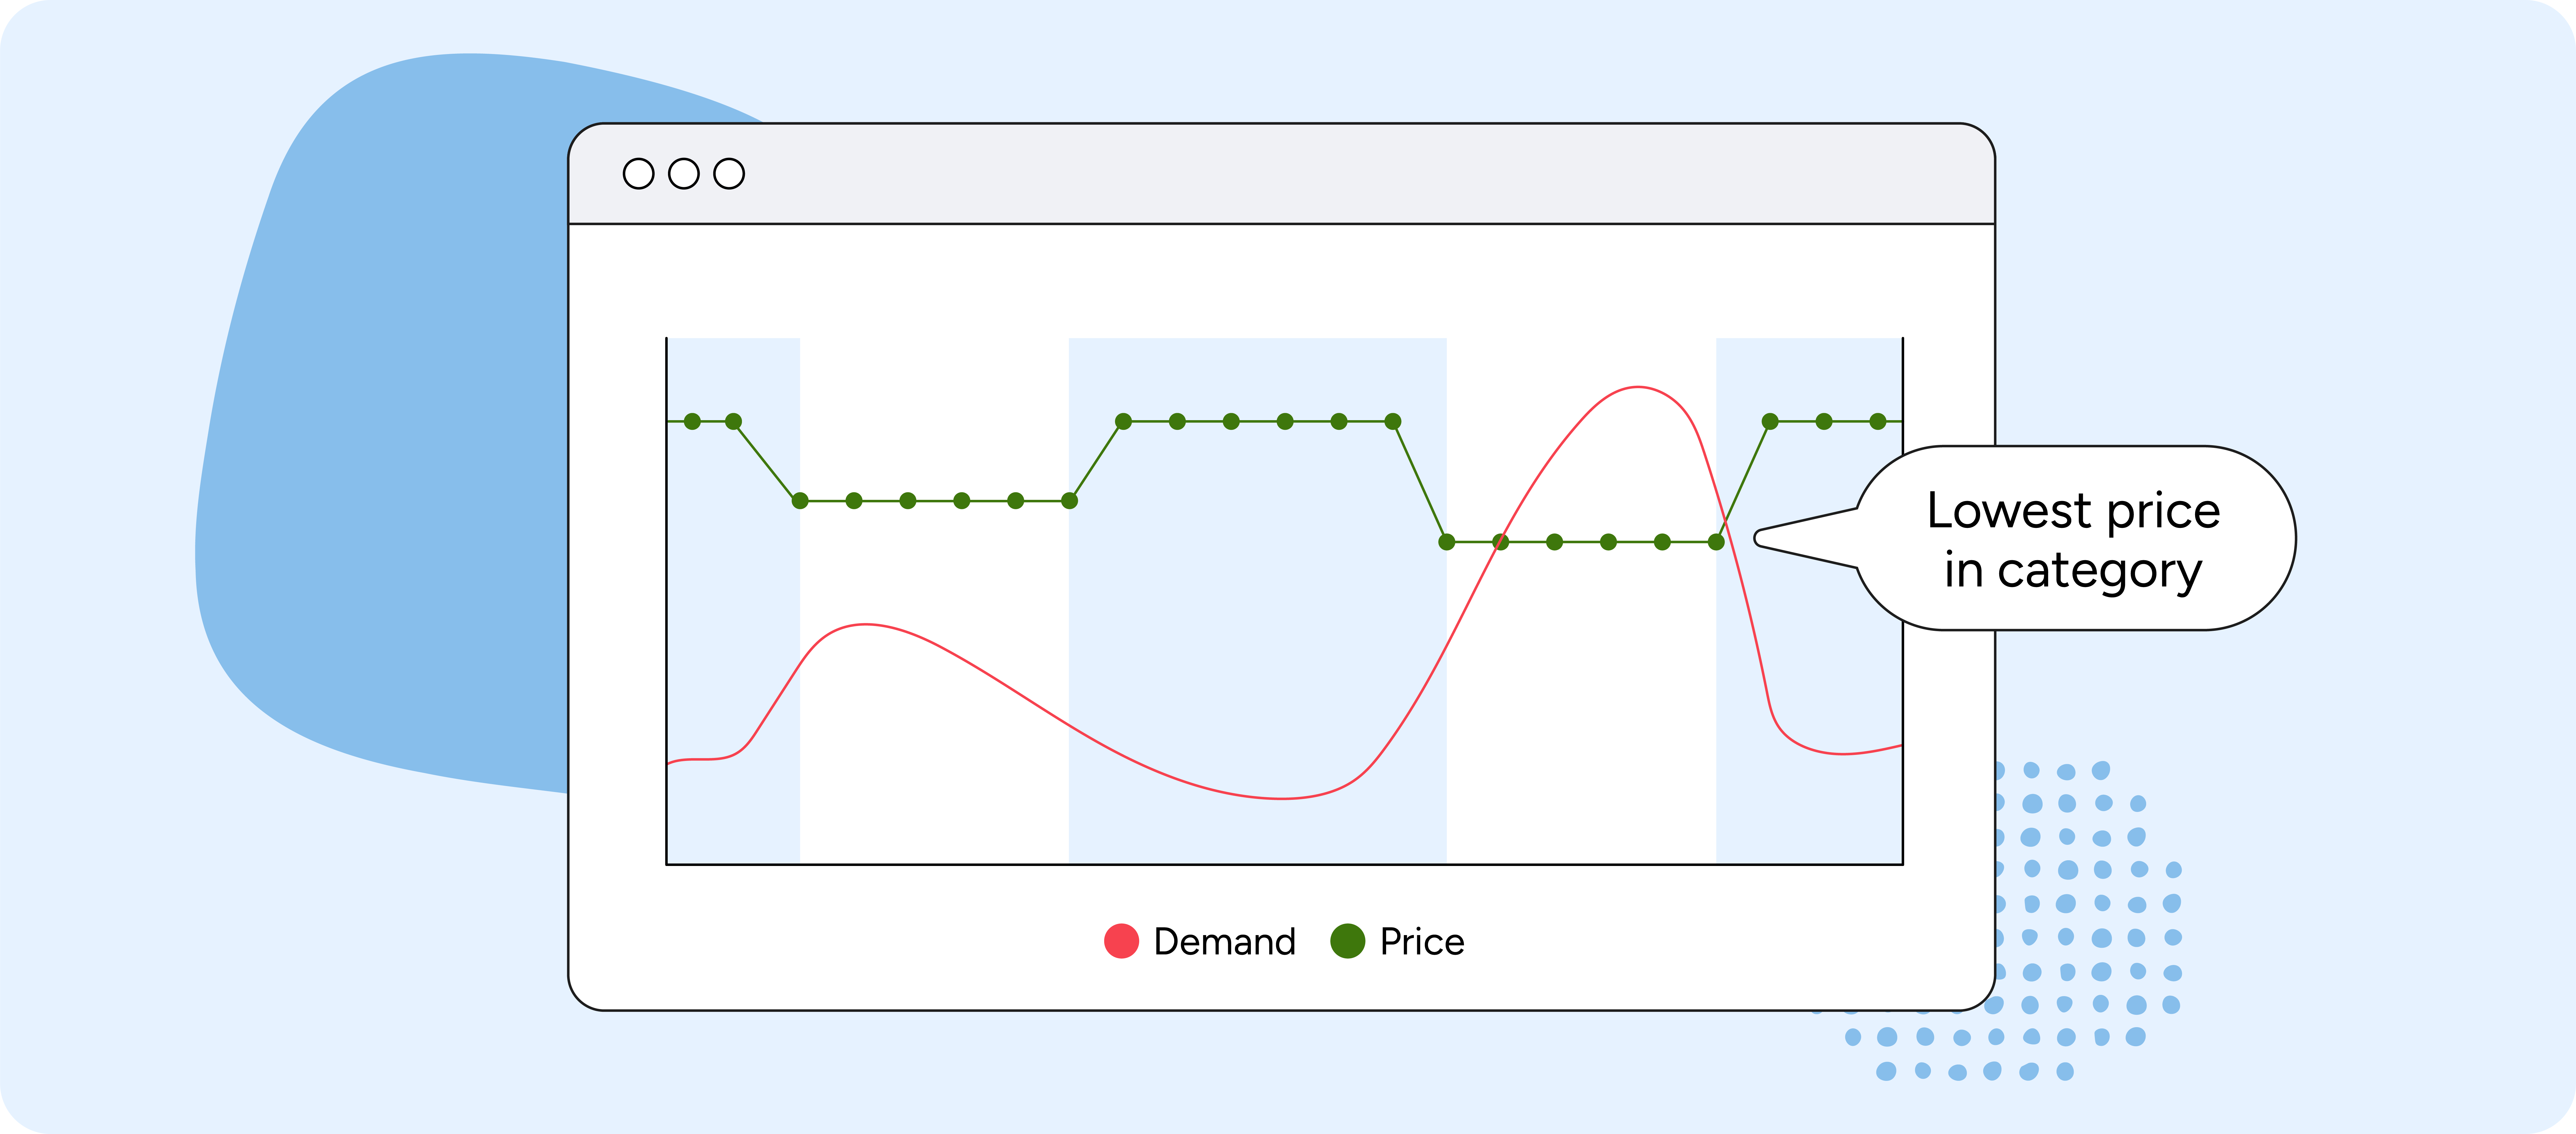 Diagram showing how price affects demand for a specific product.